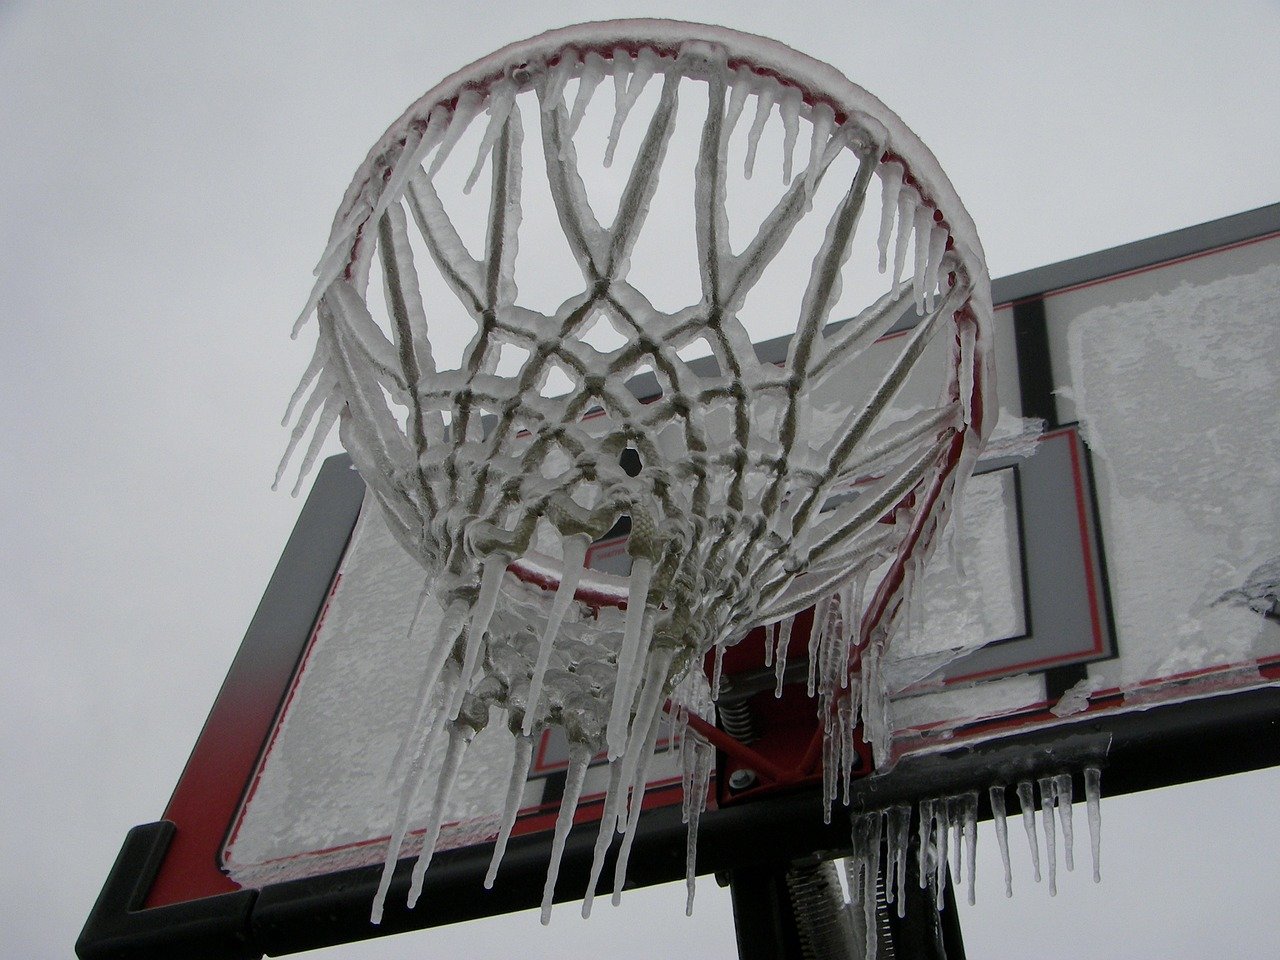 An image of a basketball rim and net covered in ice and snow.